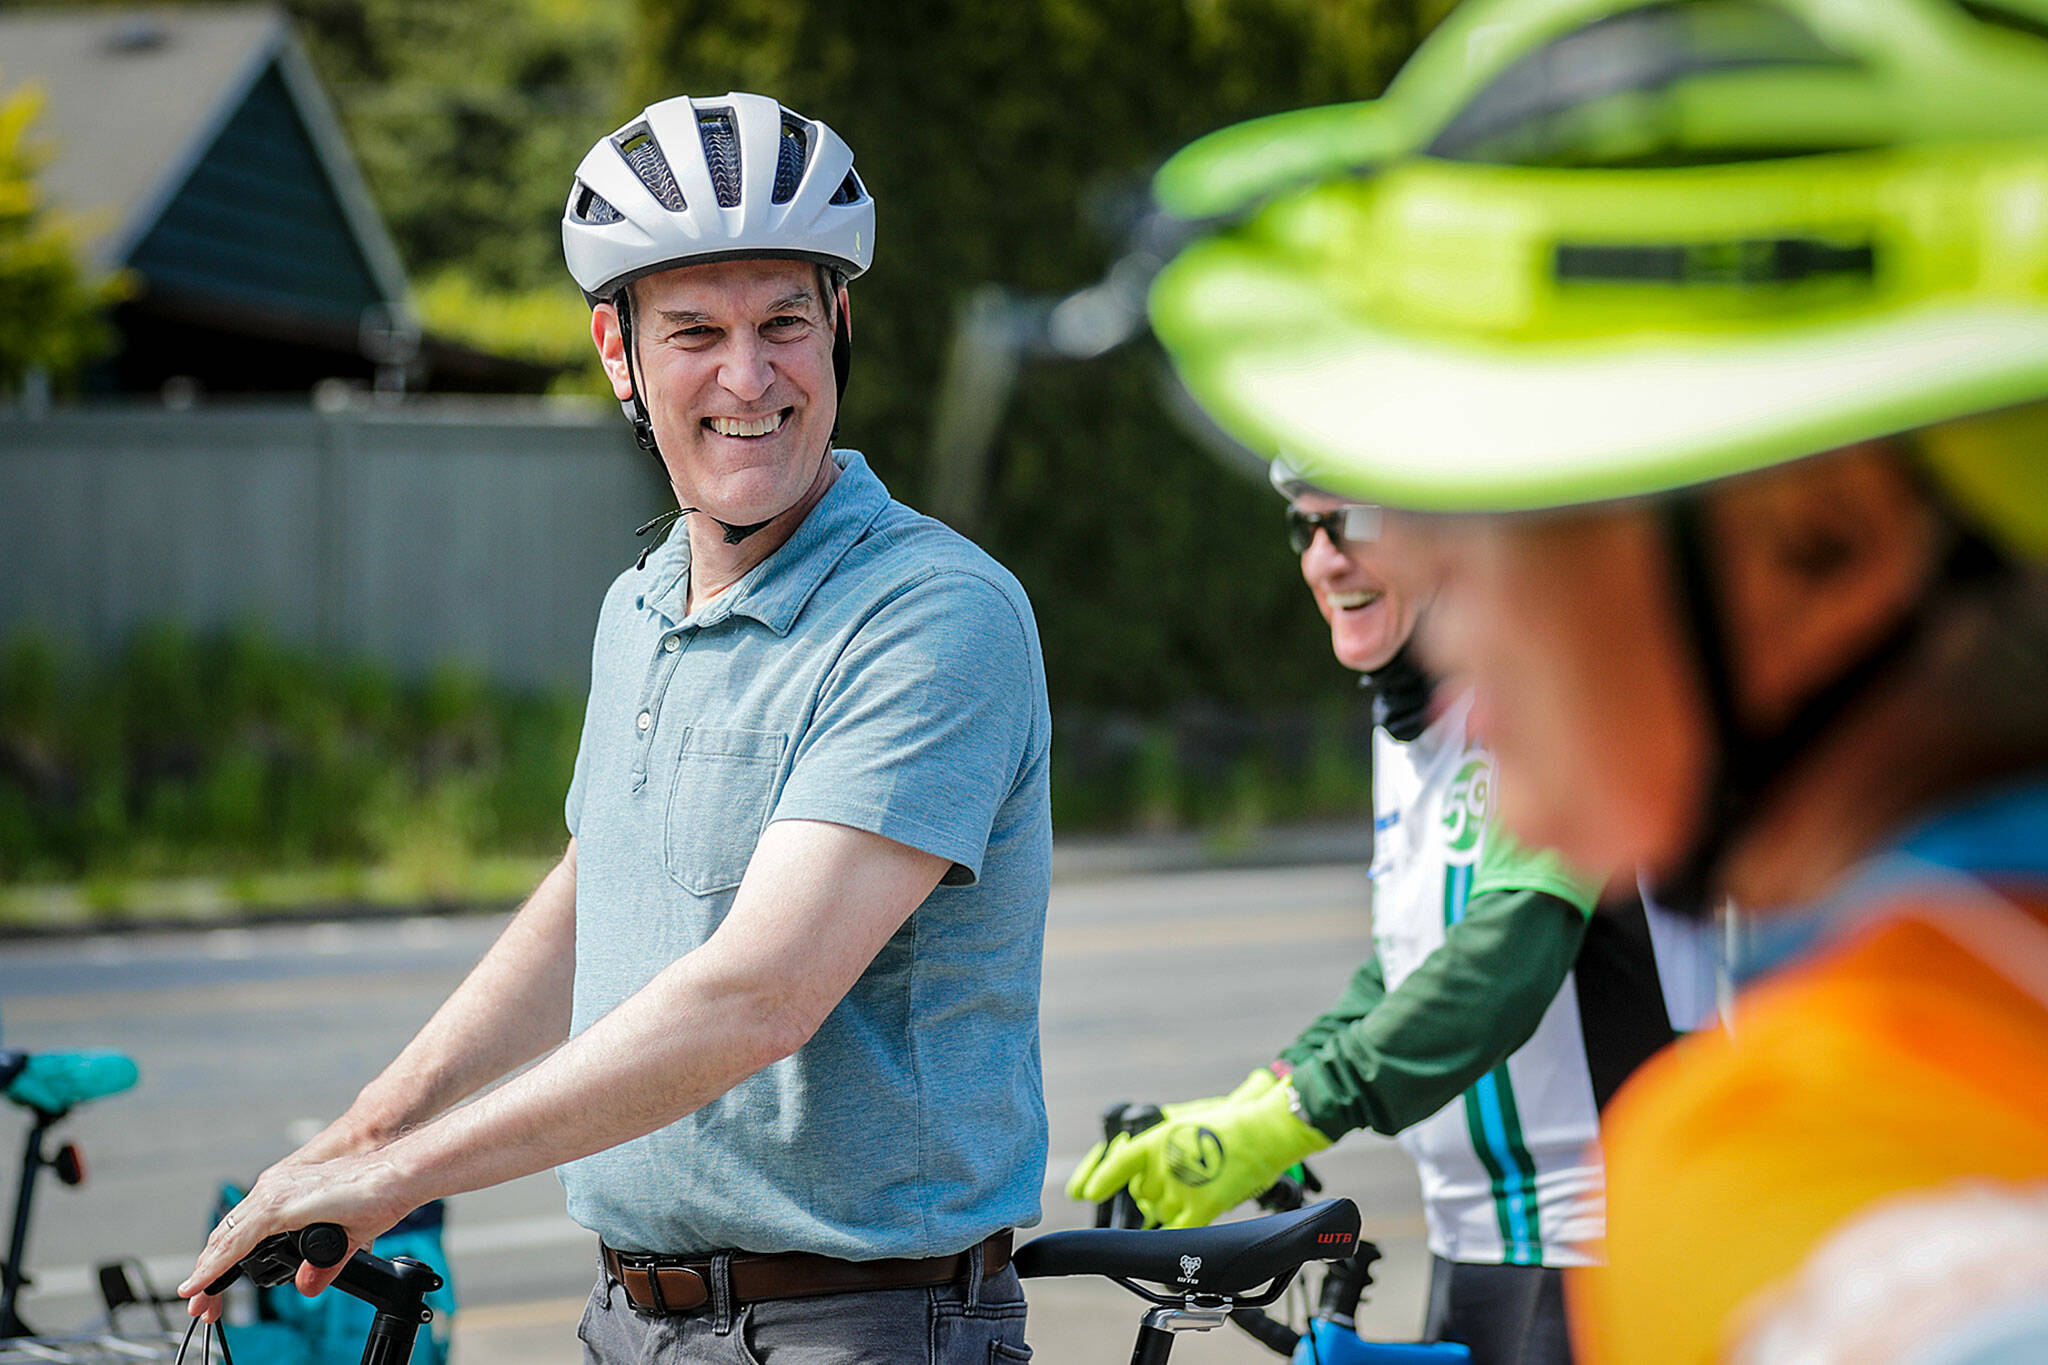 U.S. Rep. Rick Larsen shares a laugh during a bike tour of the Interurban Trail through Mountlake Terrace and Edmonds on Tuesday. (Kevin Clark / The Herald)